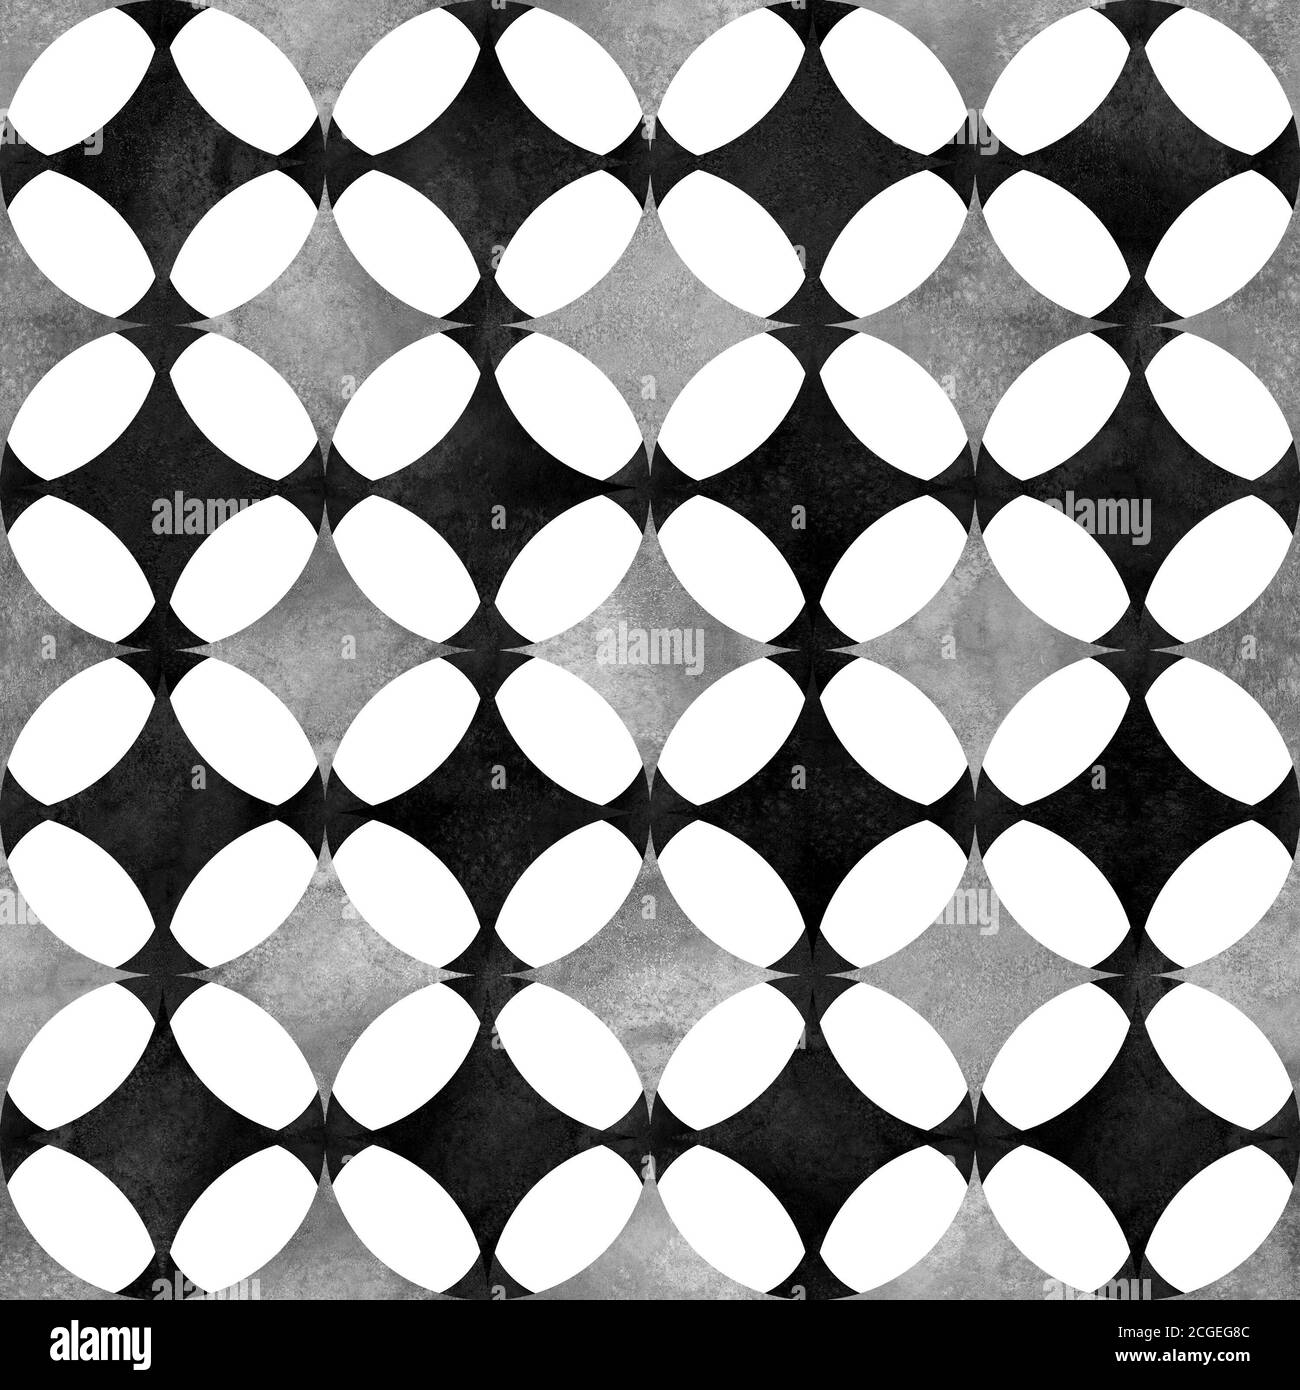 Abstract geometric seamless pattern. Black and white minimalist monochrome watercolor artwork with simple shapes and figures. Watercolour circles shap Stock Photo